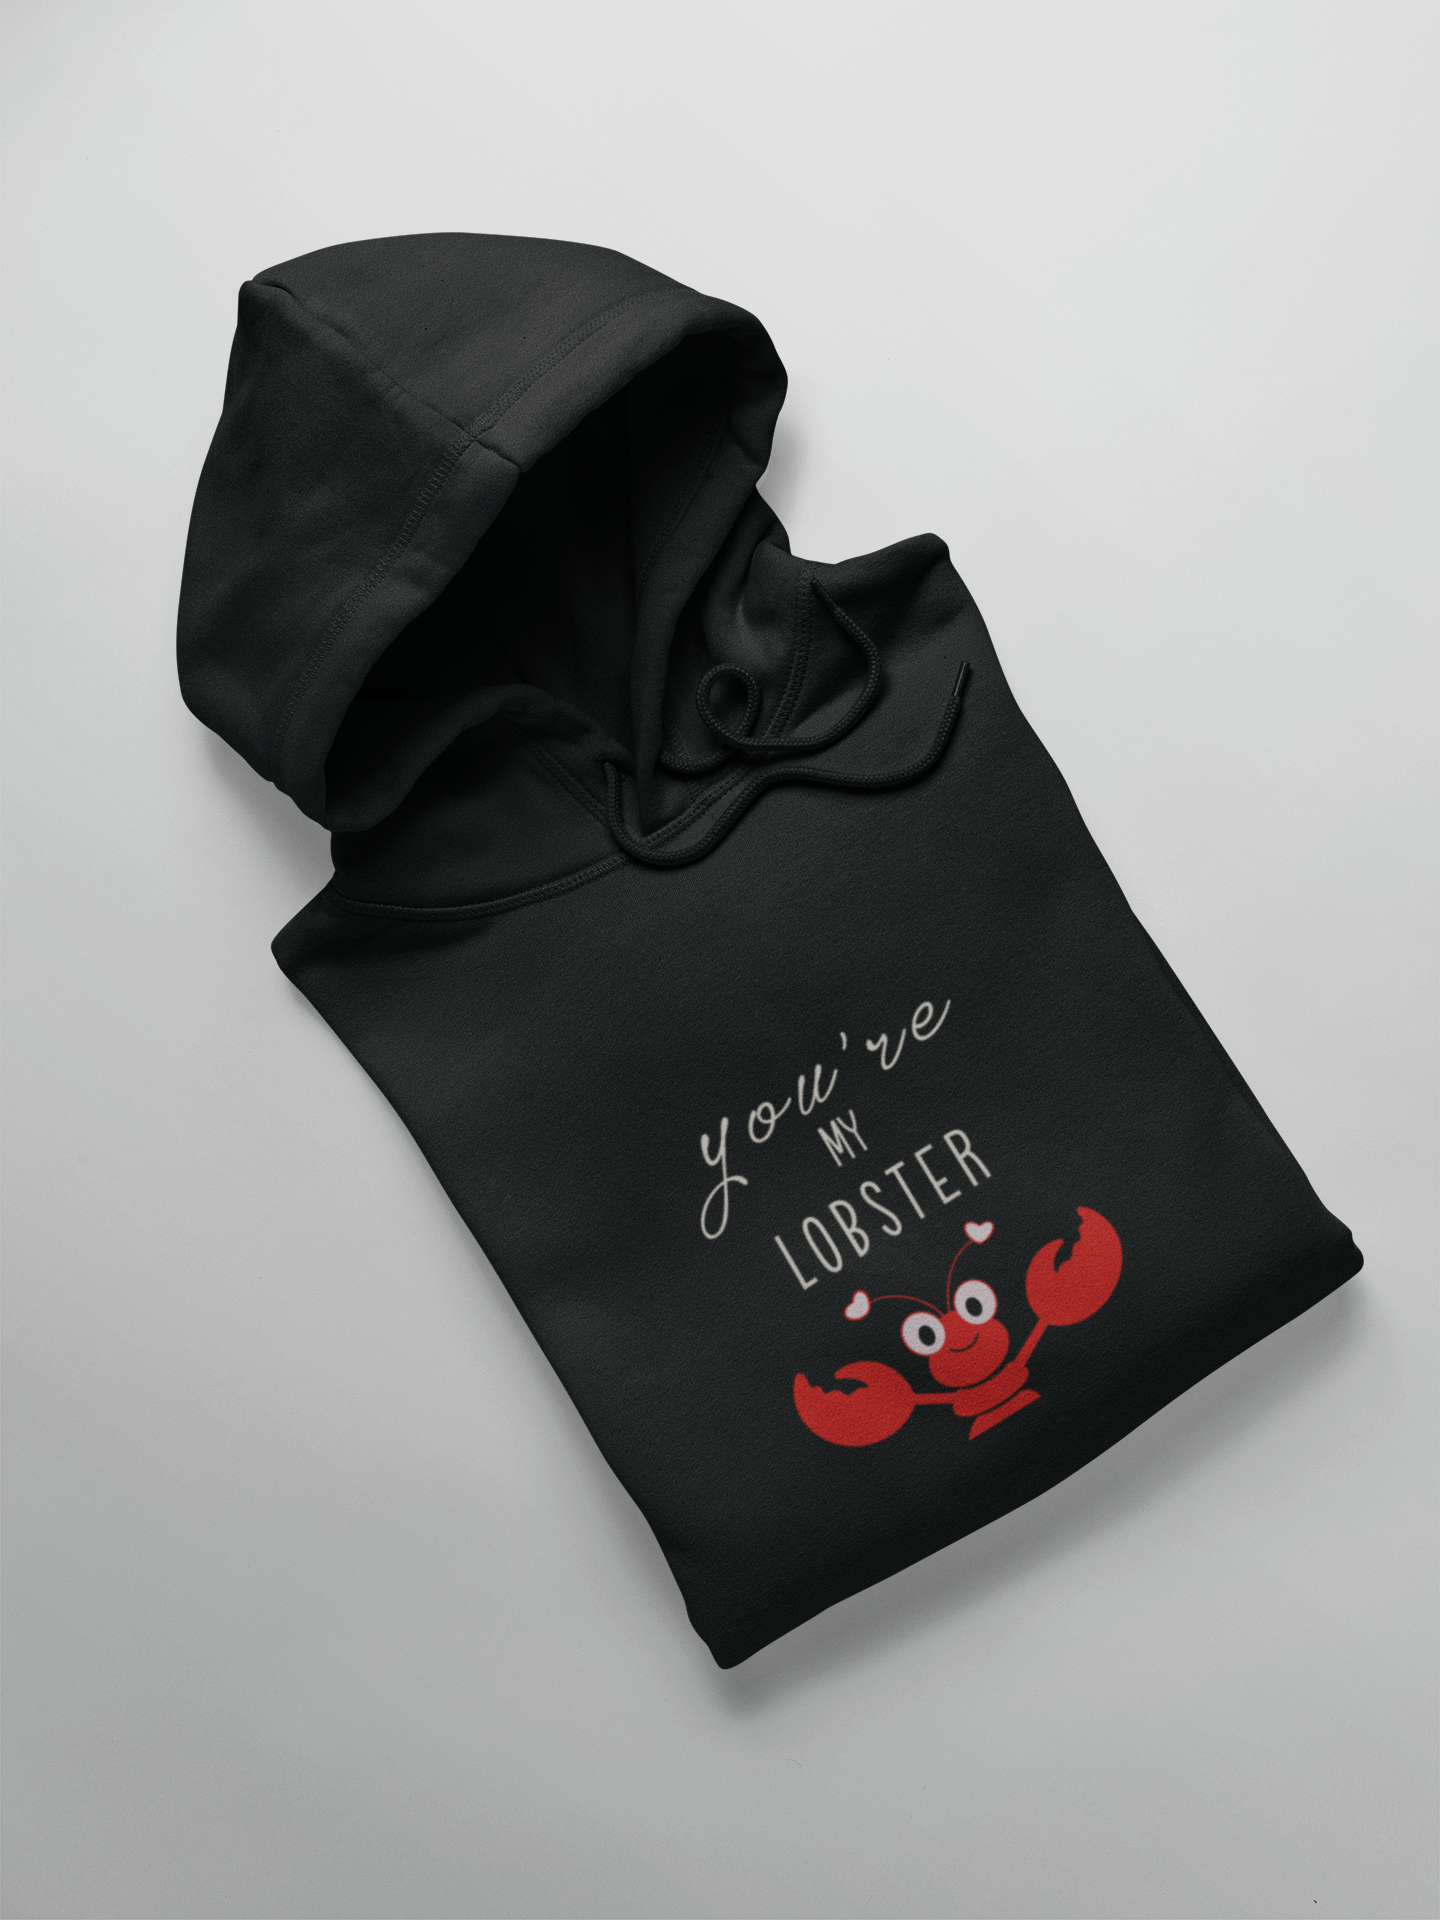 You Are My Lobster: Friends- Winter Couple Hoodies. BOTH BLACK